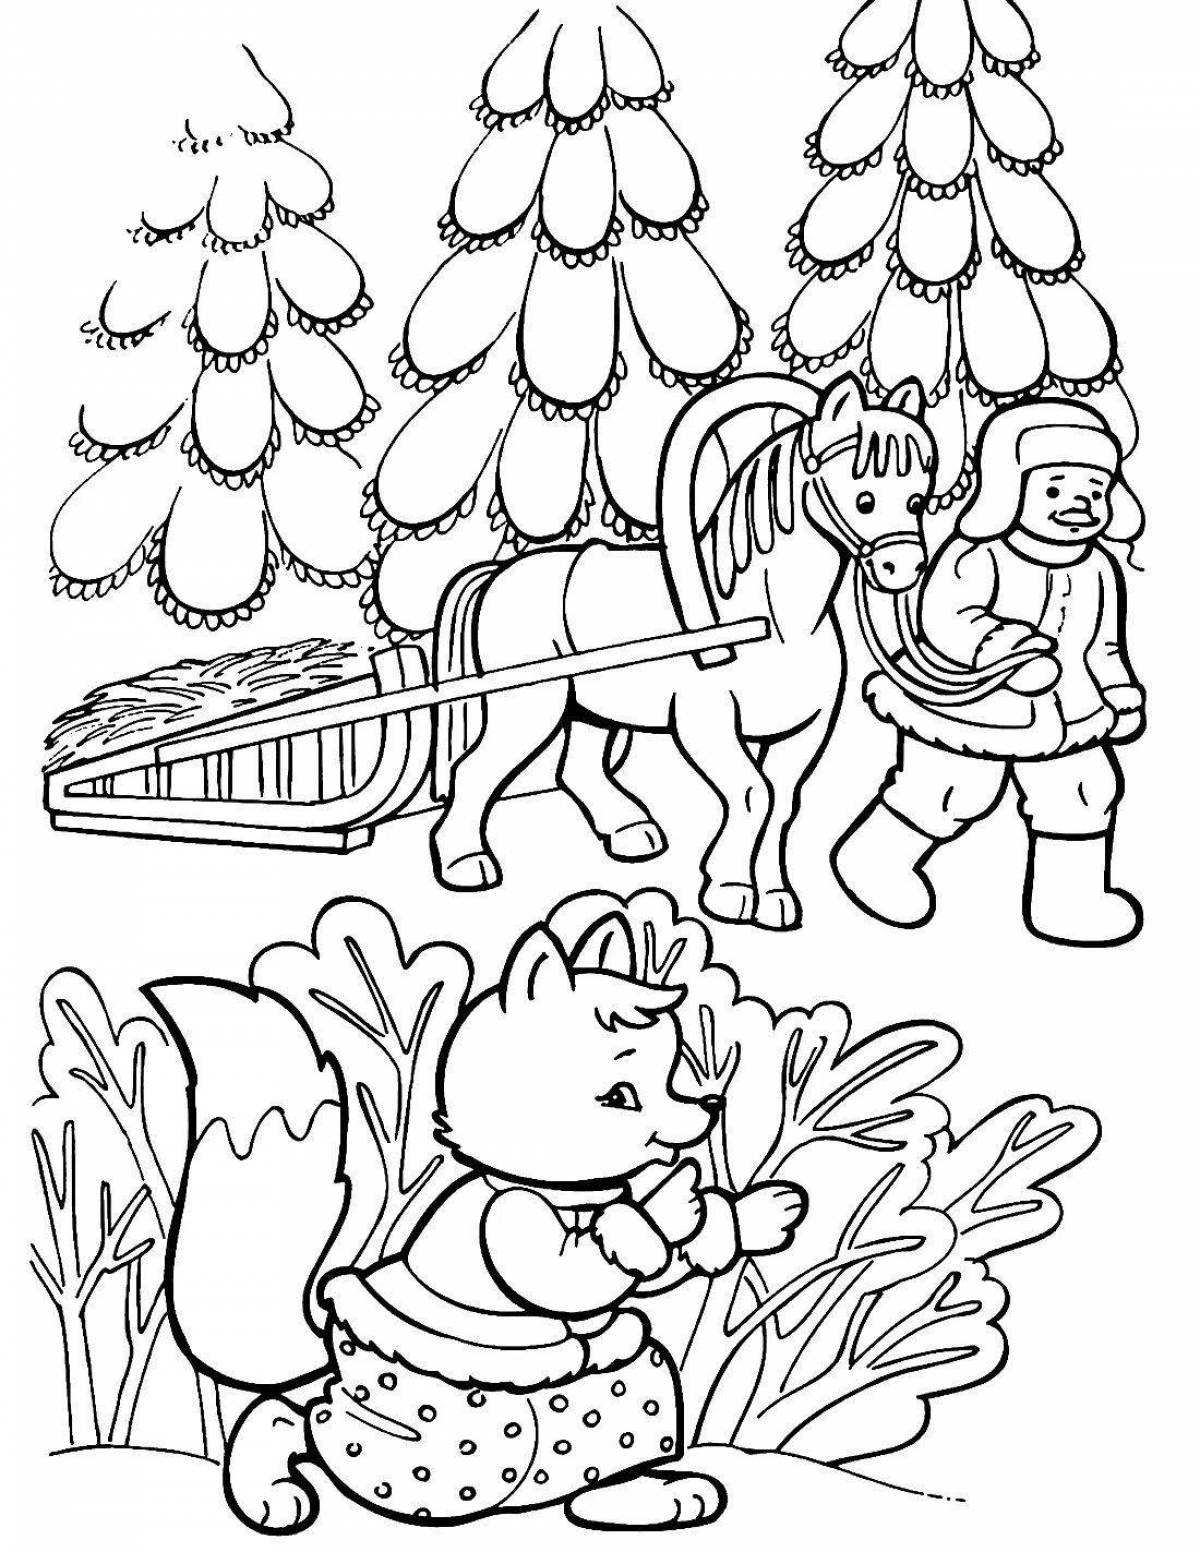 Exotic snowman and fox coloring book